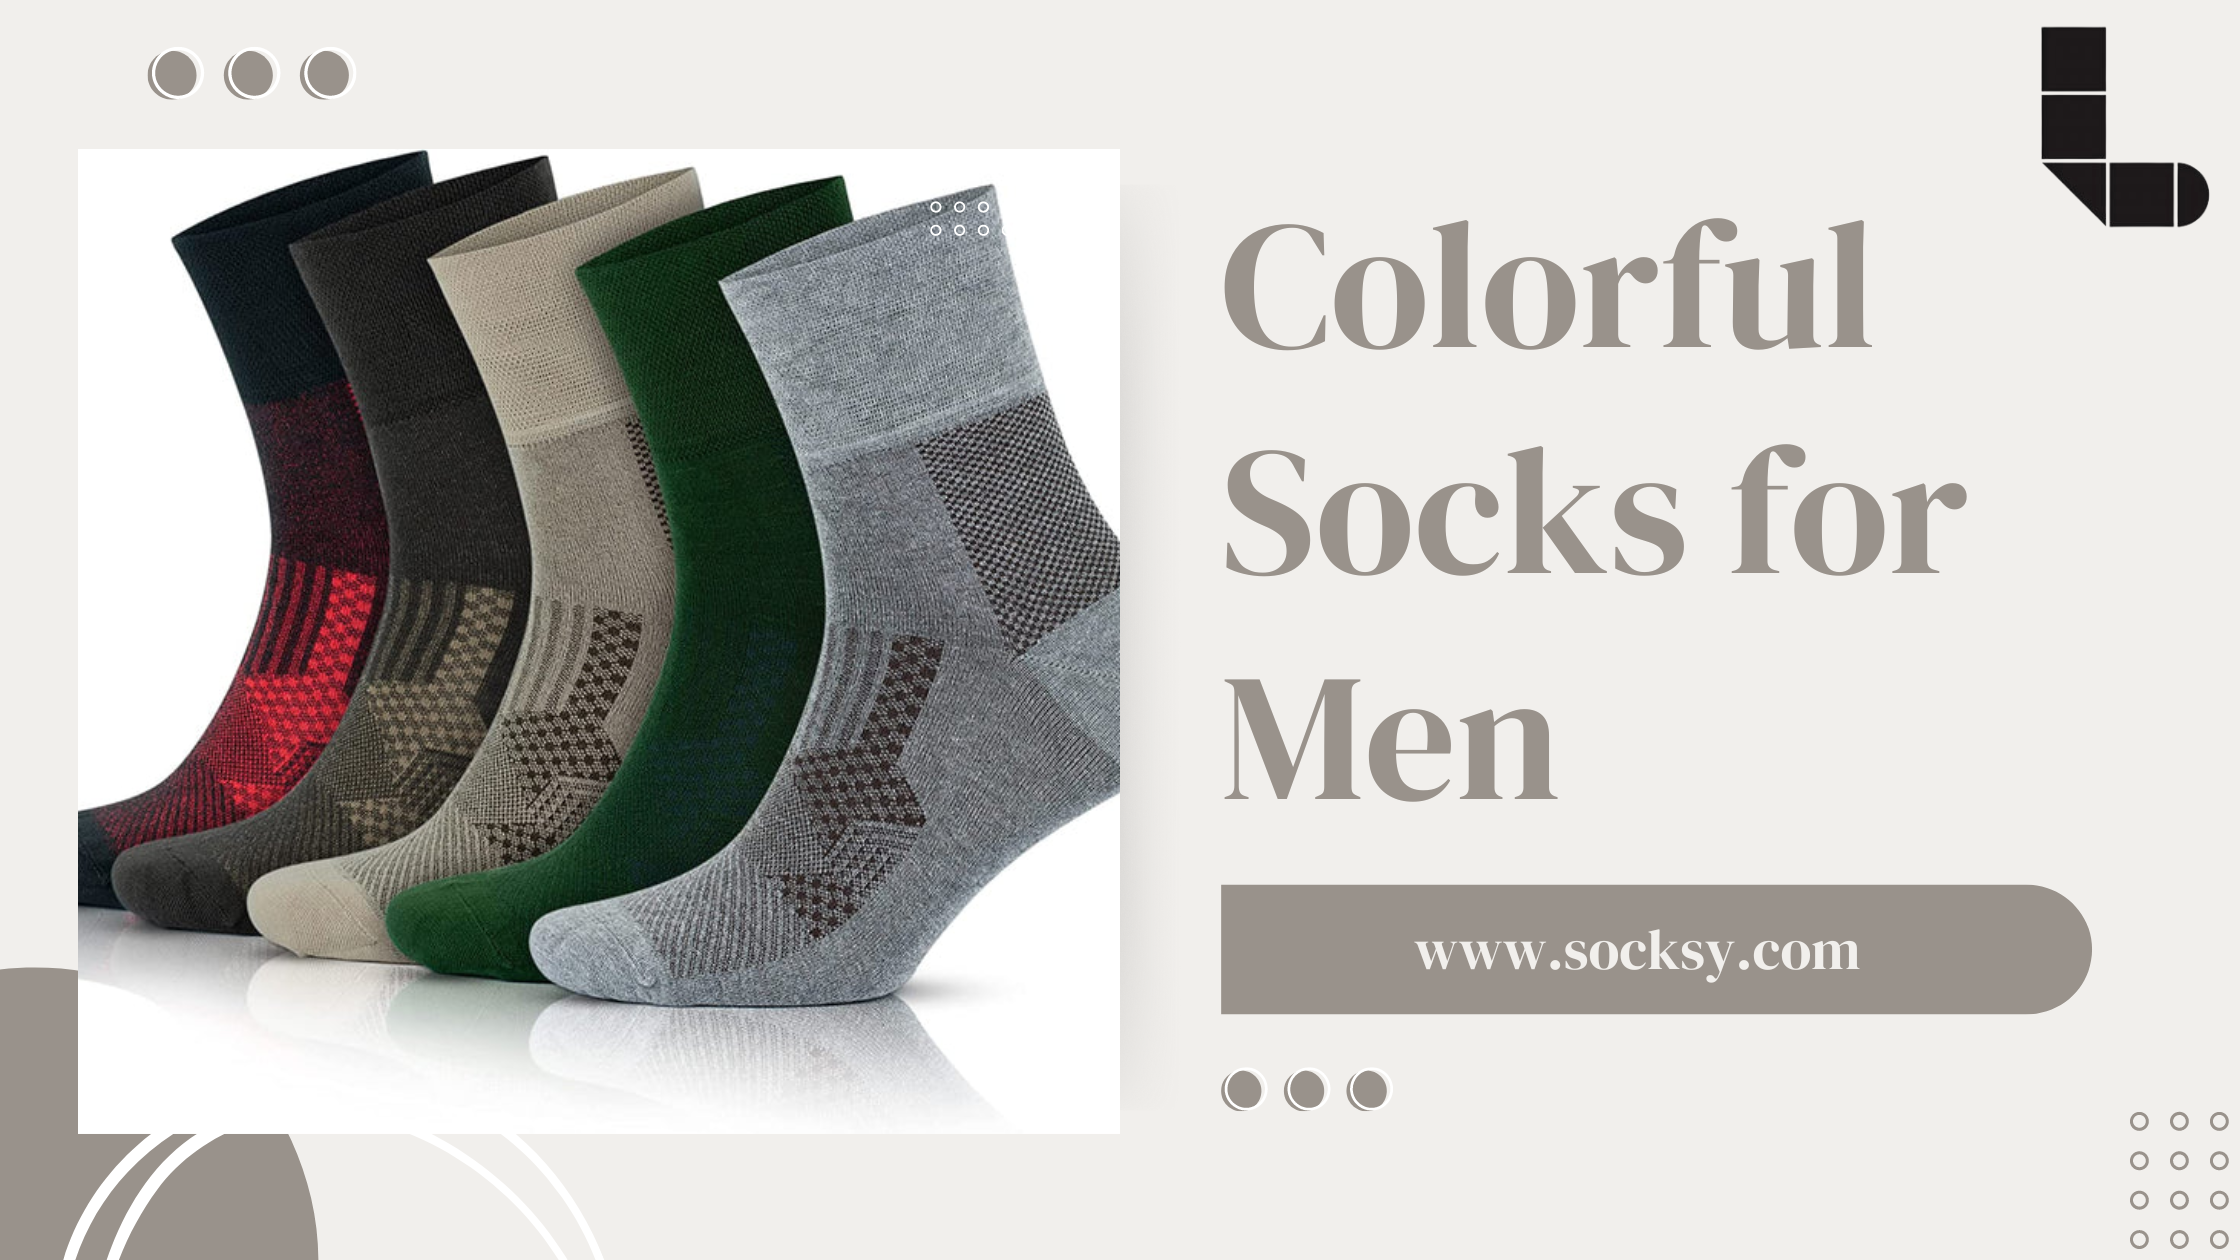 It's all About Colorful Socks for Men